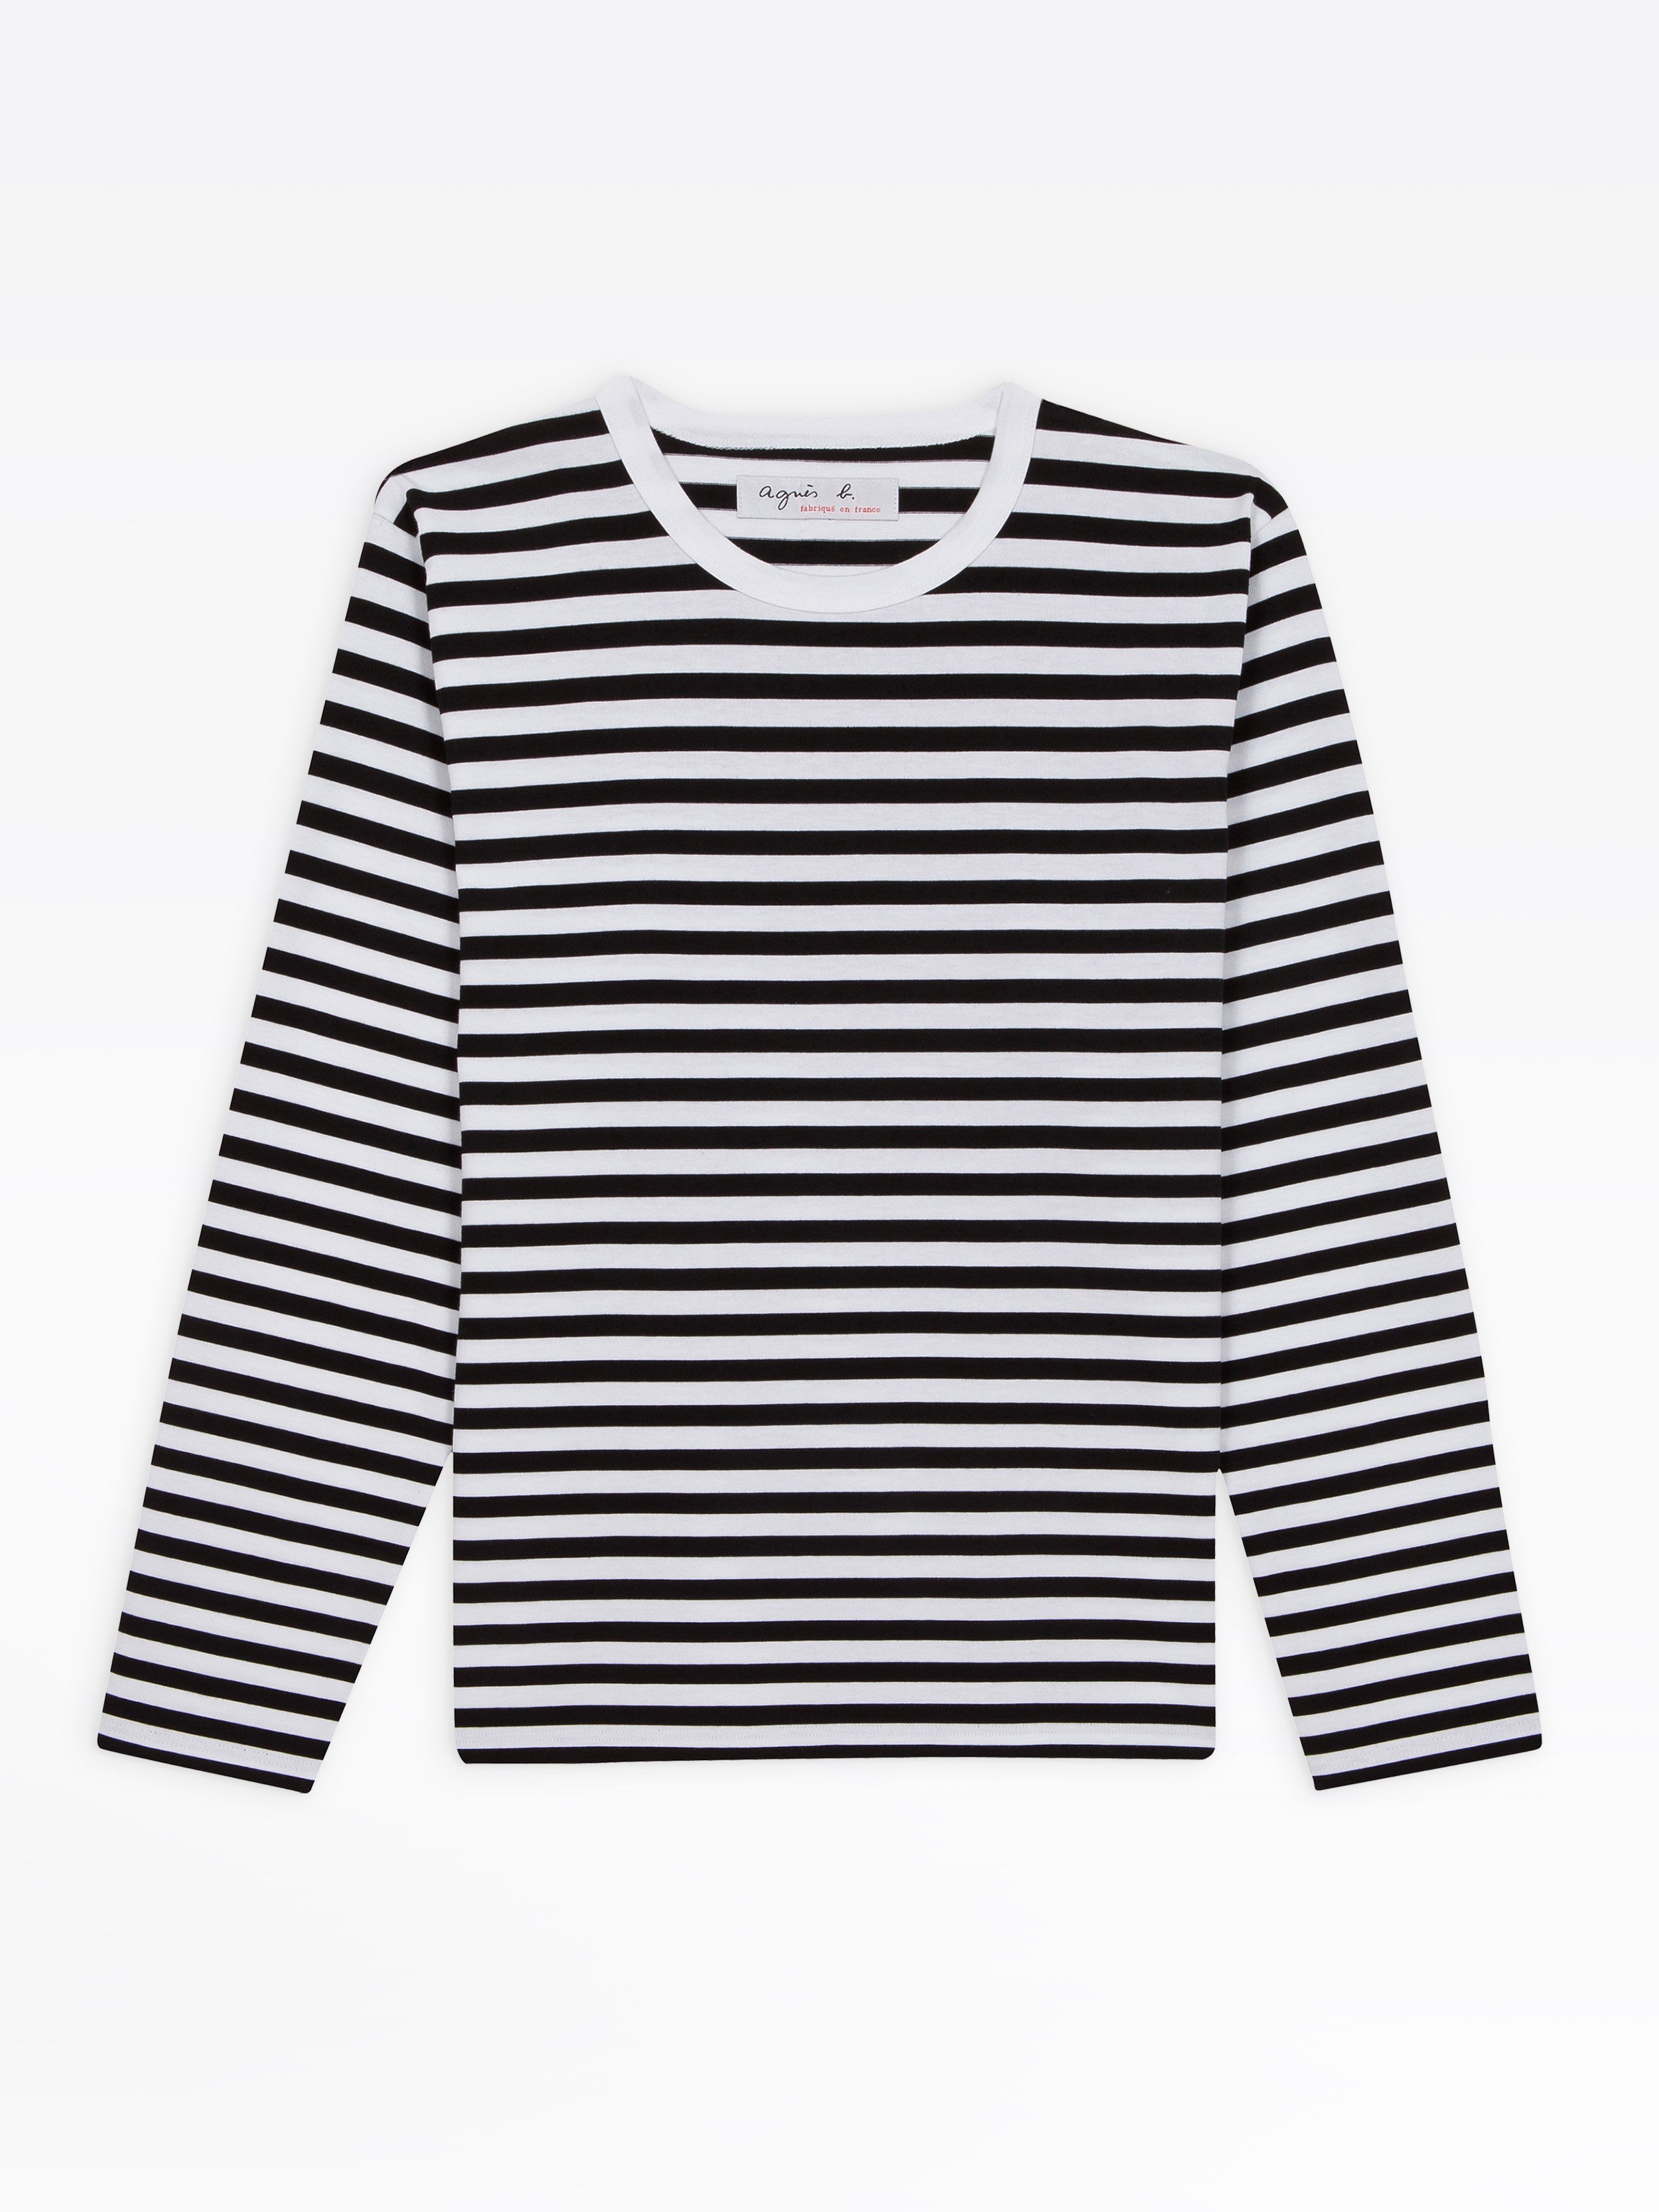 black and white long sleeves striped Coulos t-shirt | agnès